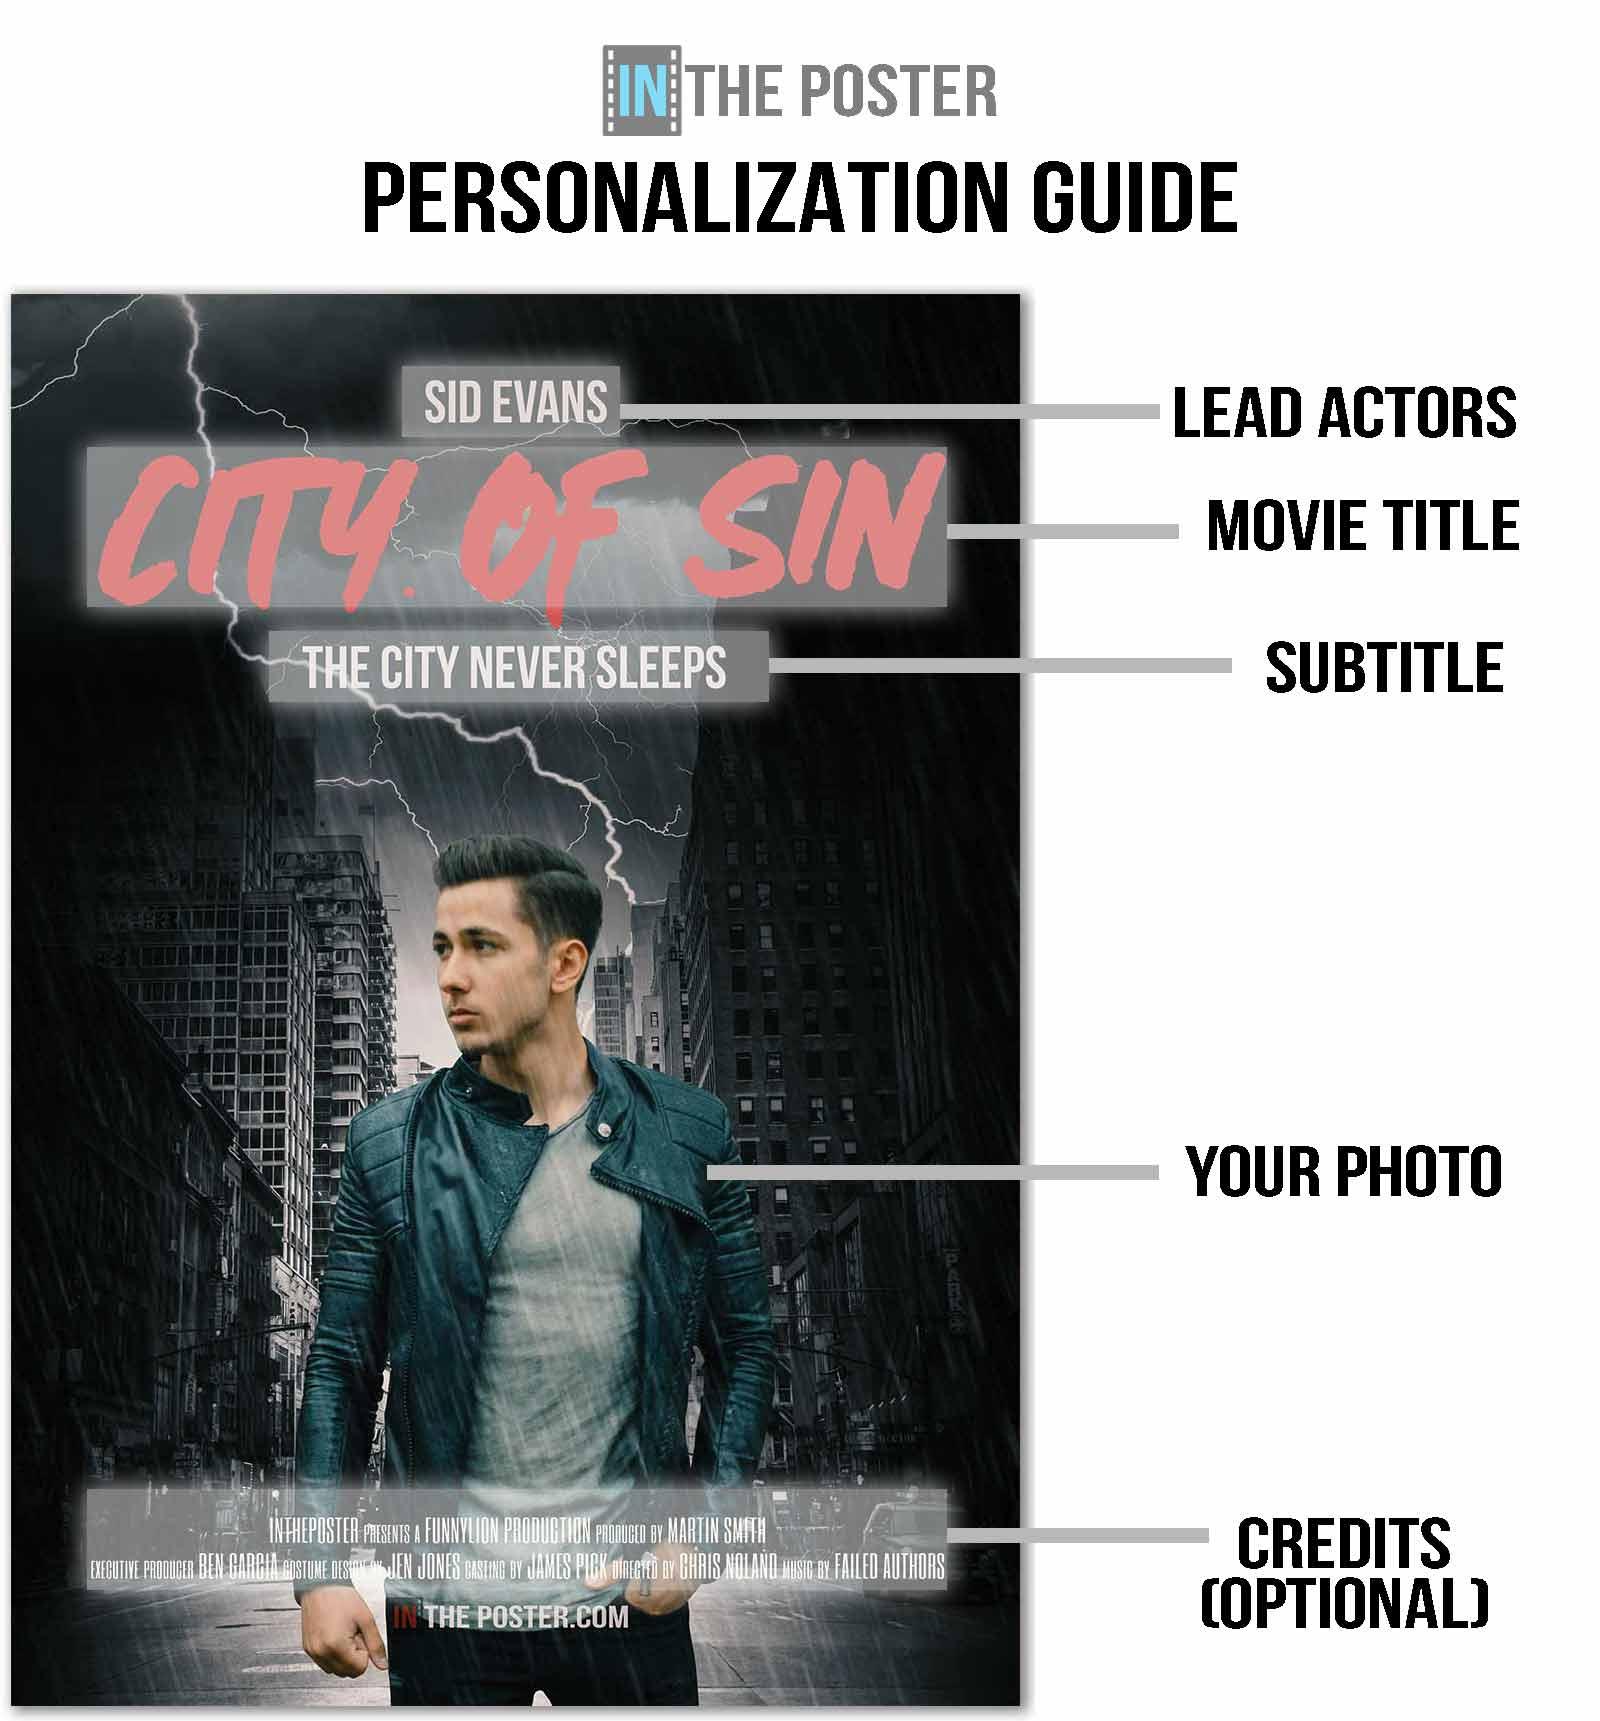 A diagram showing how to personalize The City of Sin movie poster design